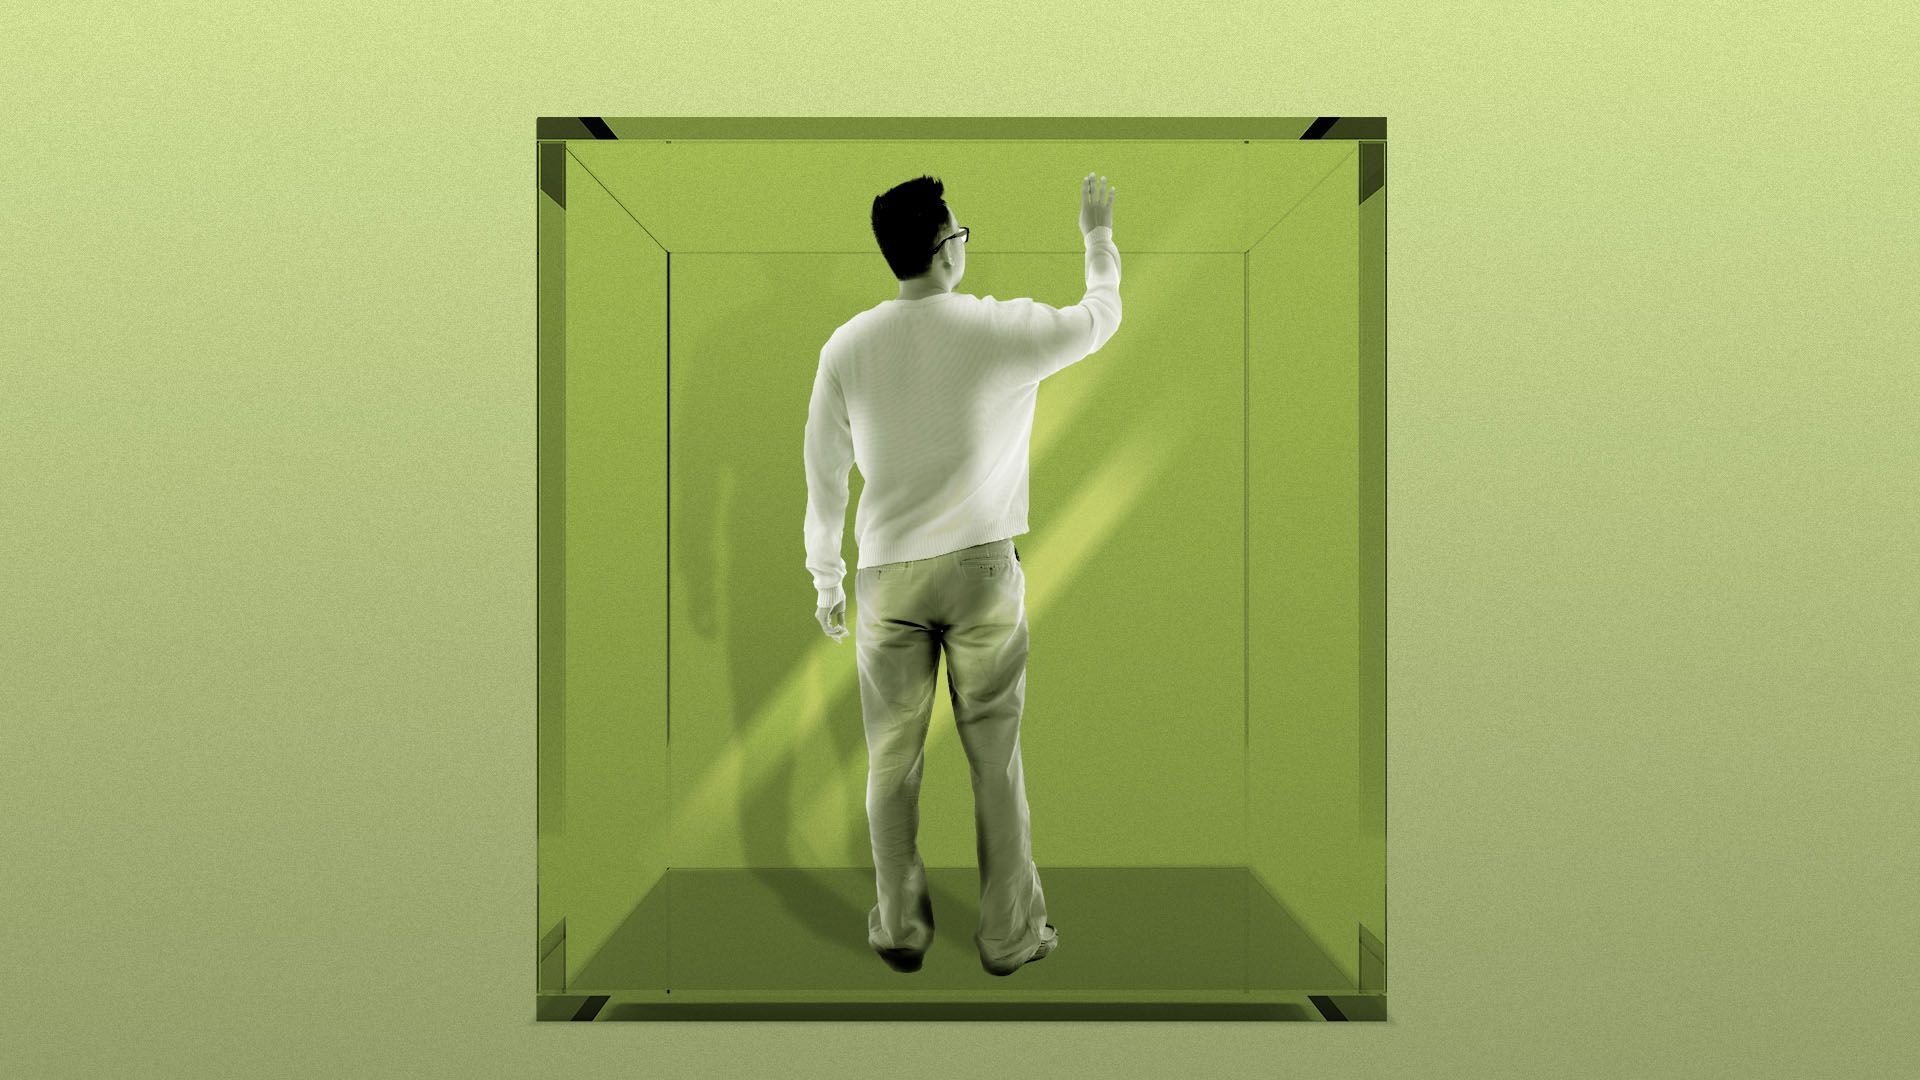 Illustration of a man in a glass box